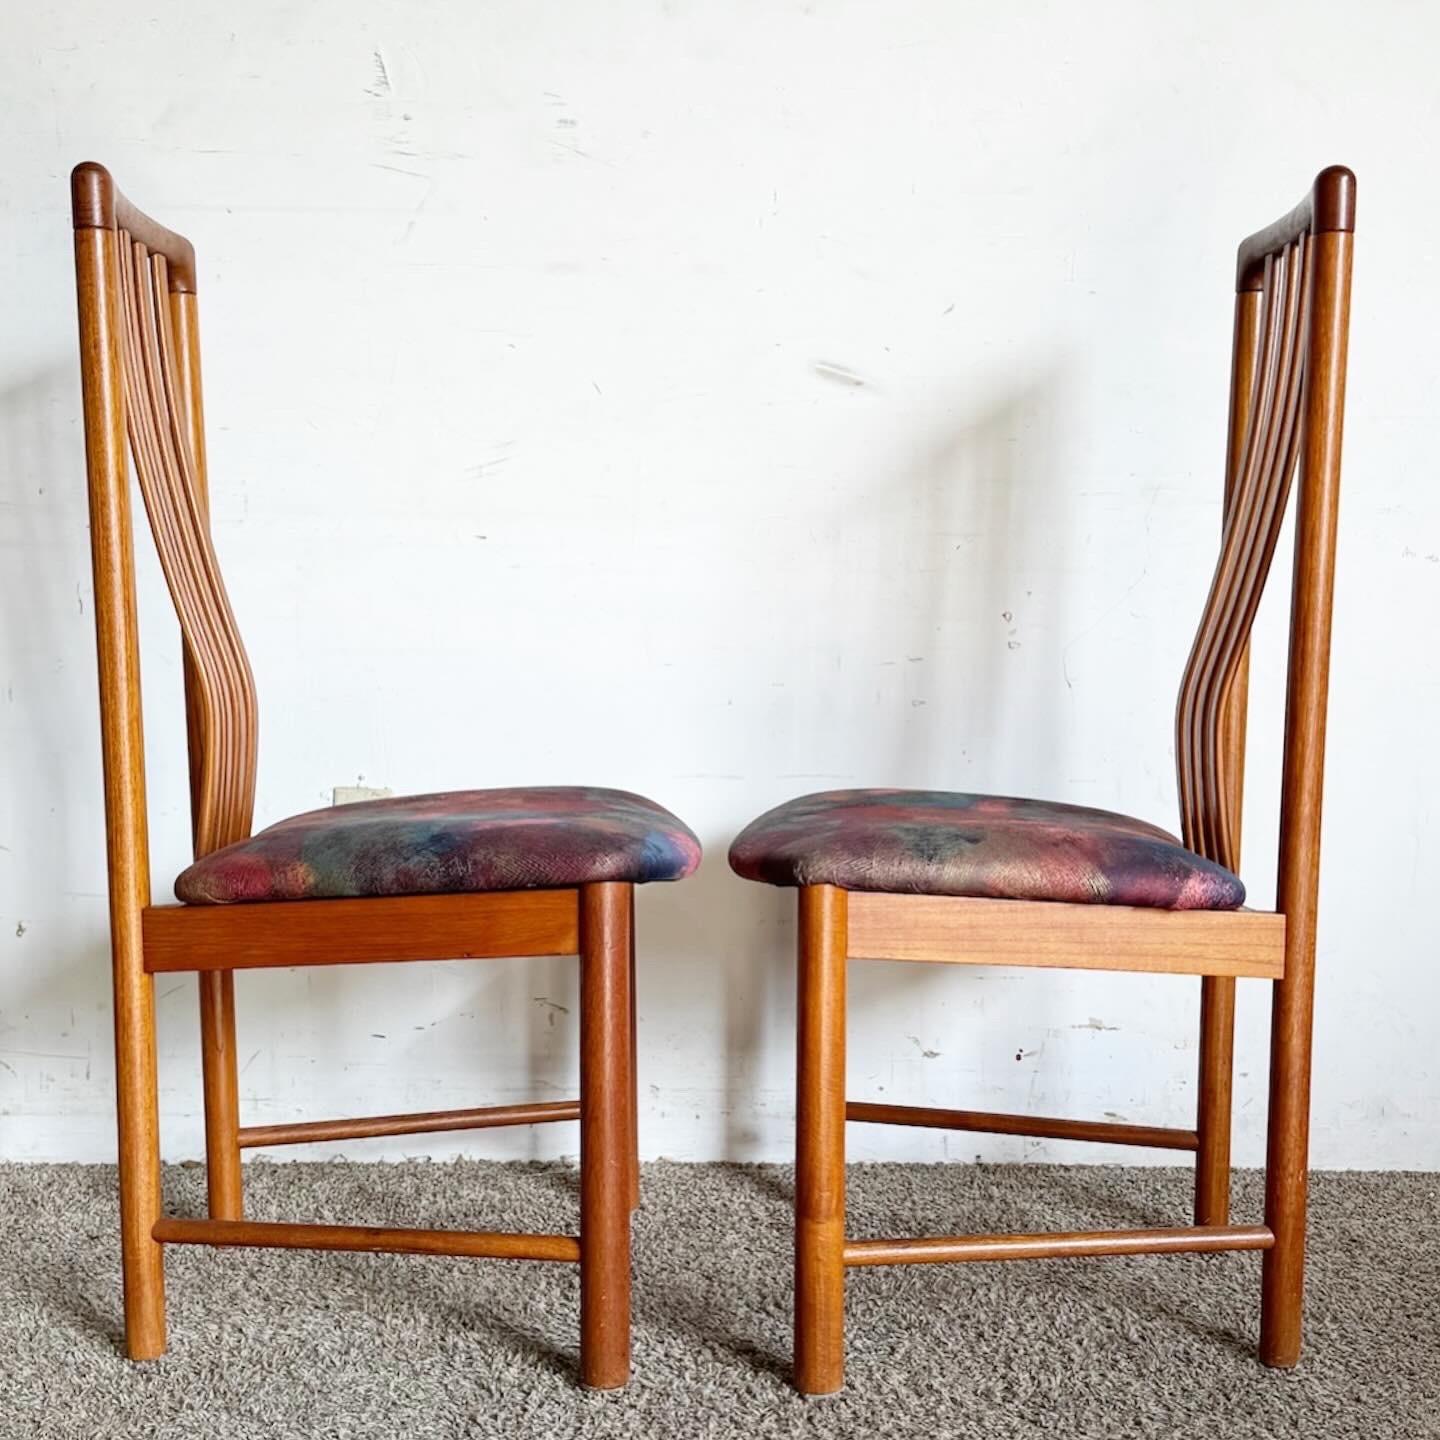 Danish Mid Century Modern Dining Chairs by Boltinge - Set of 4 For Sale 1